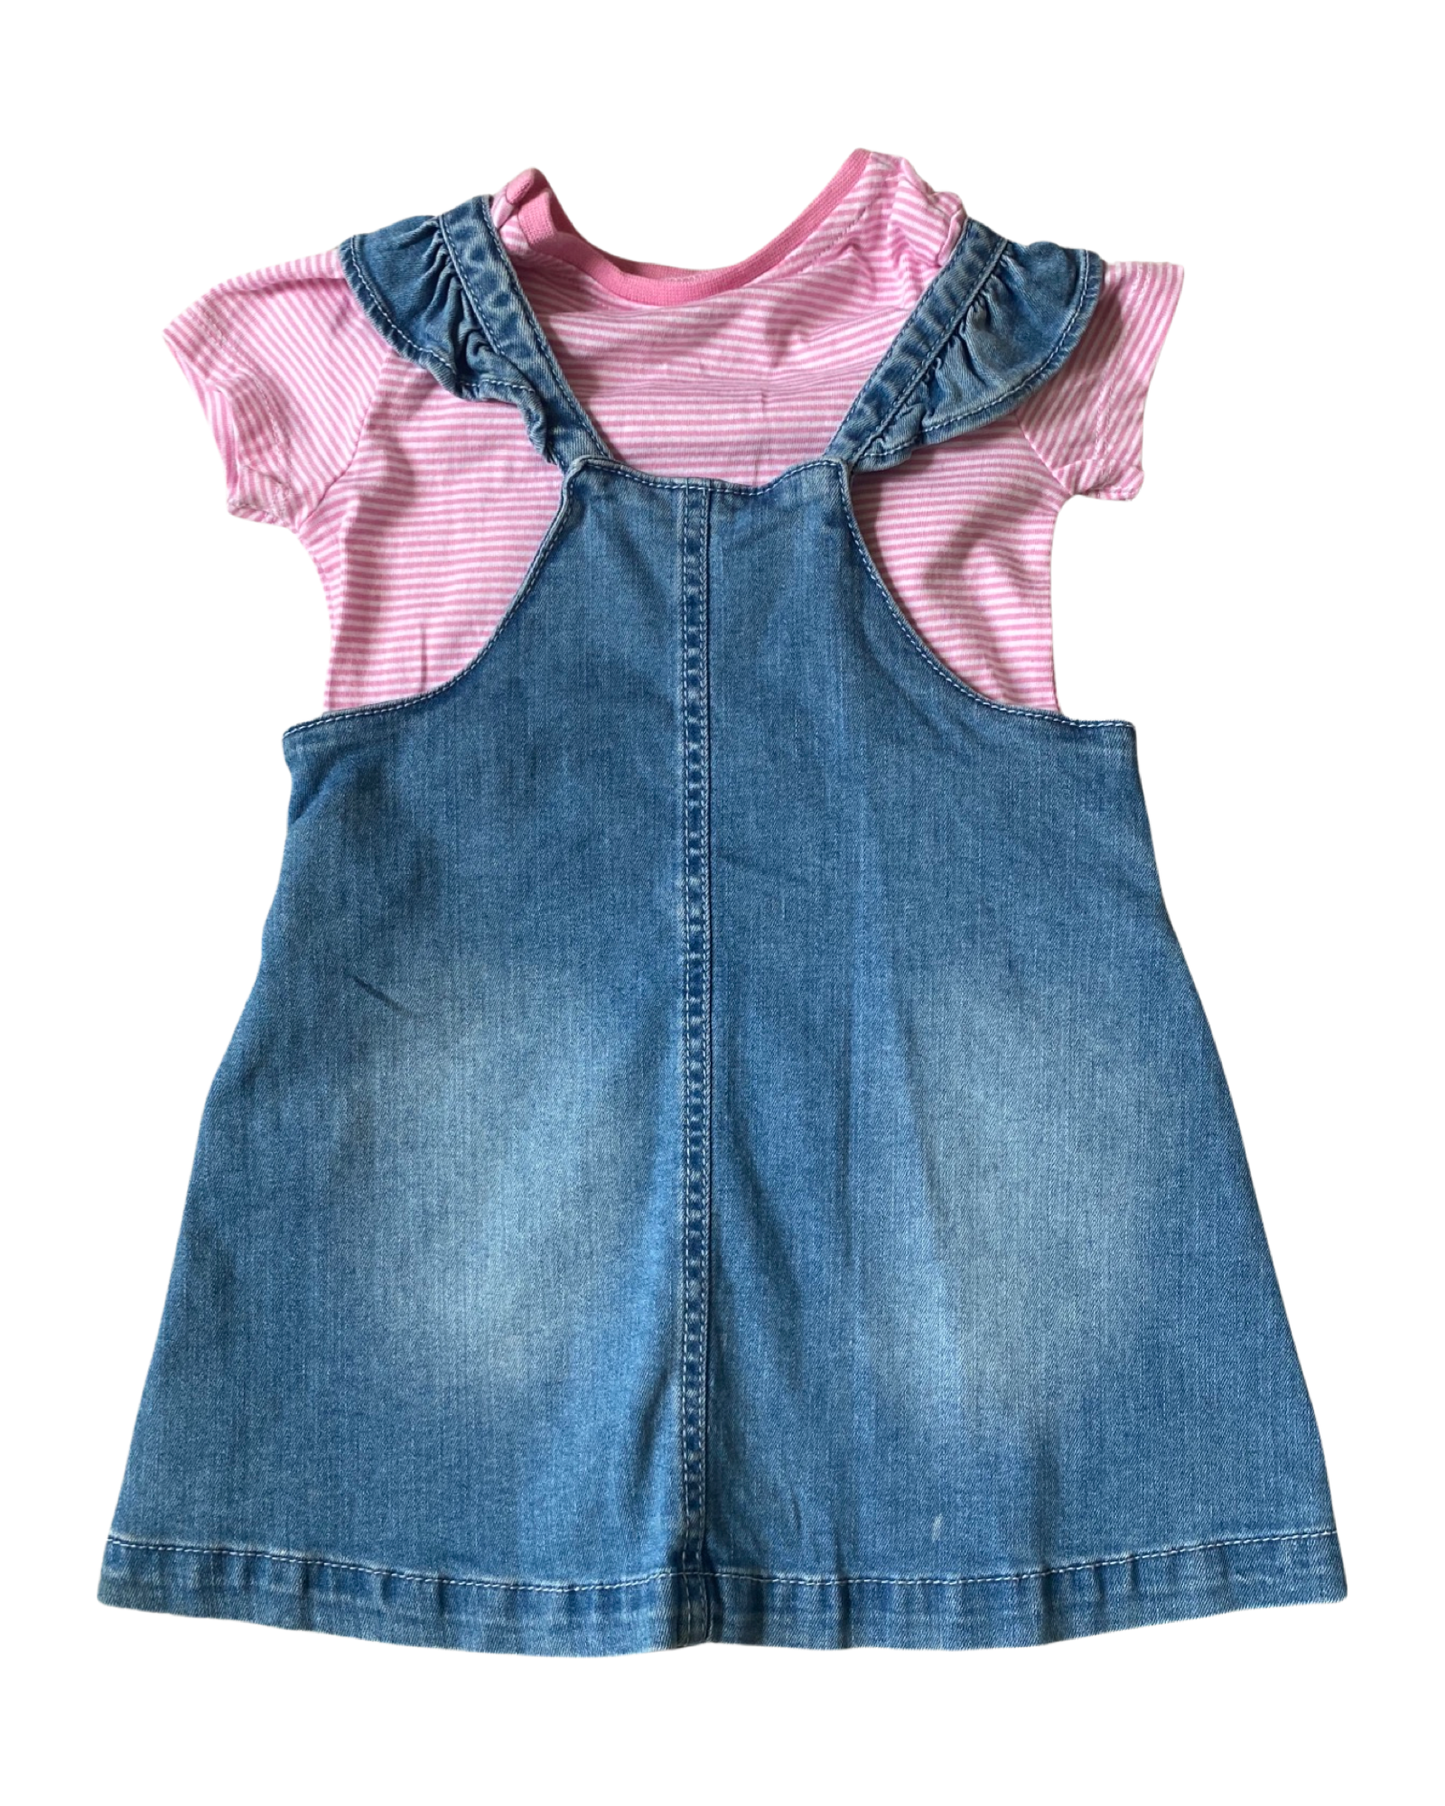 Mothercare denim pinafore dress with striped pink t shirt (size 12-18mths)